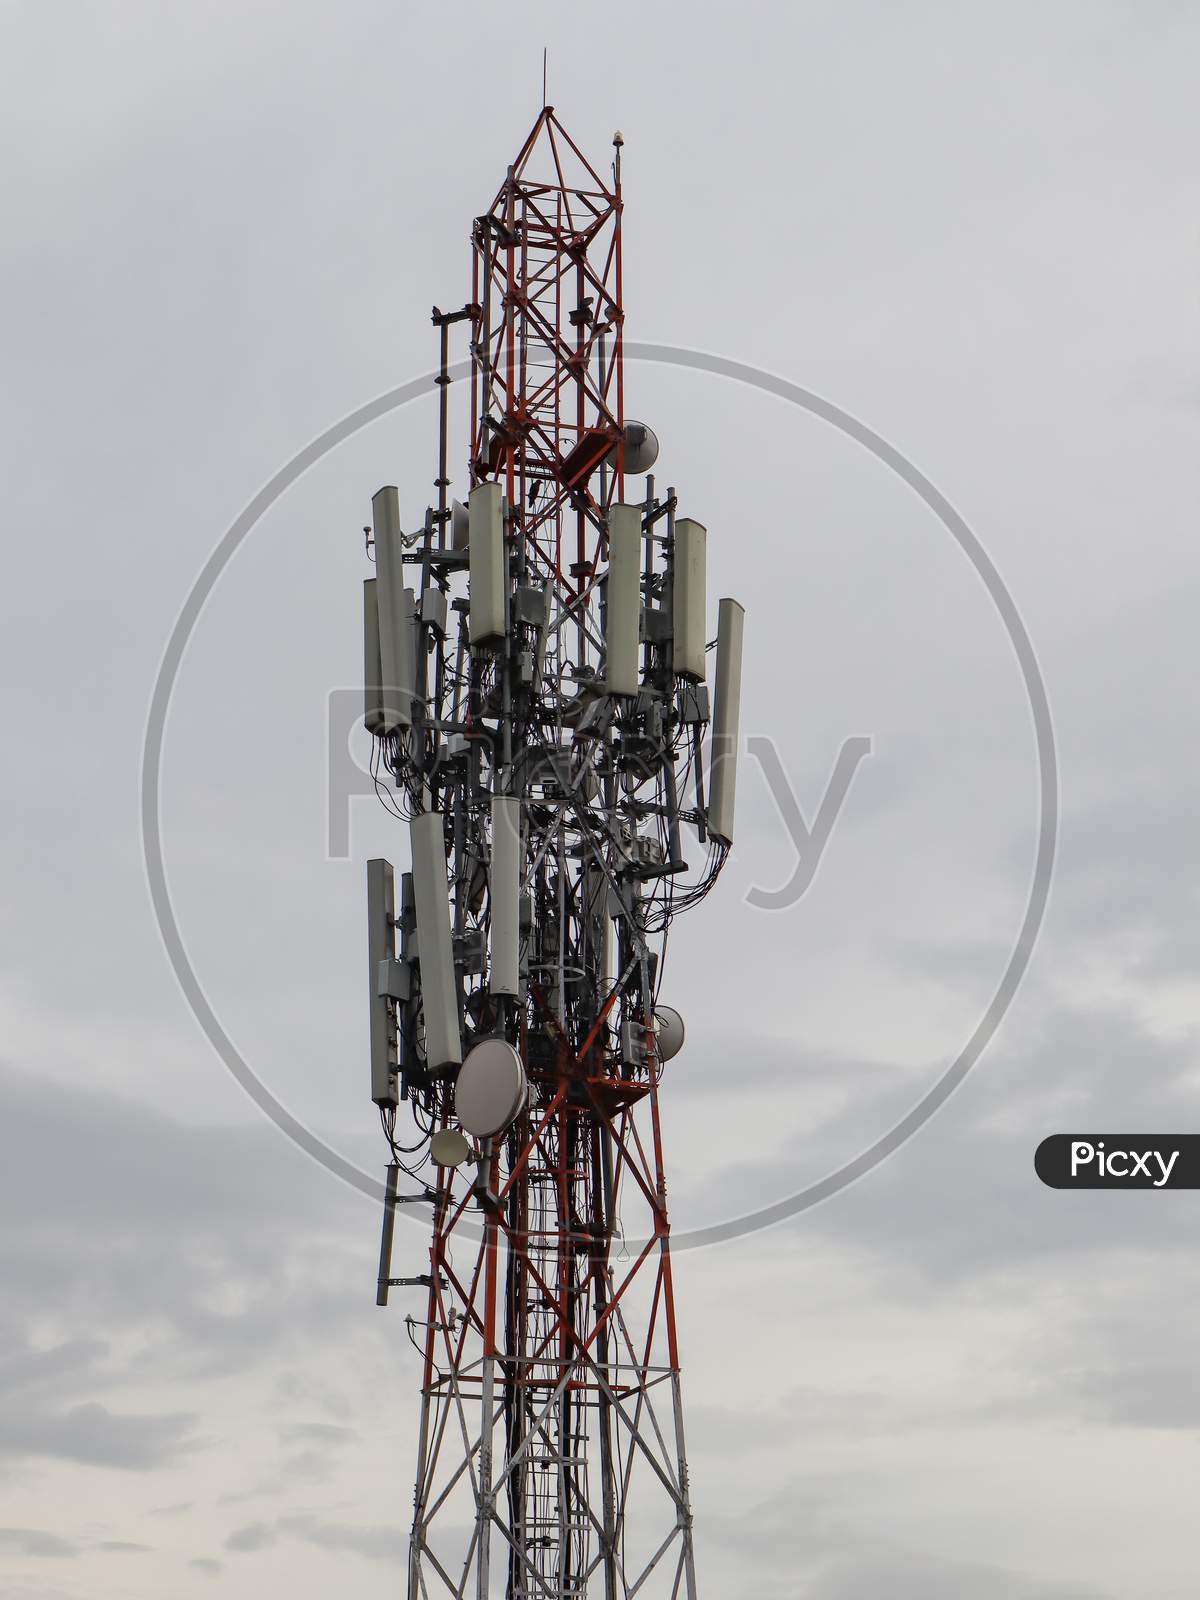 Mobile telecommunication tower or cell tower with antennae and electronic communications equipments.